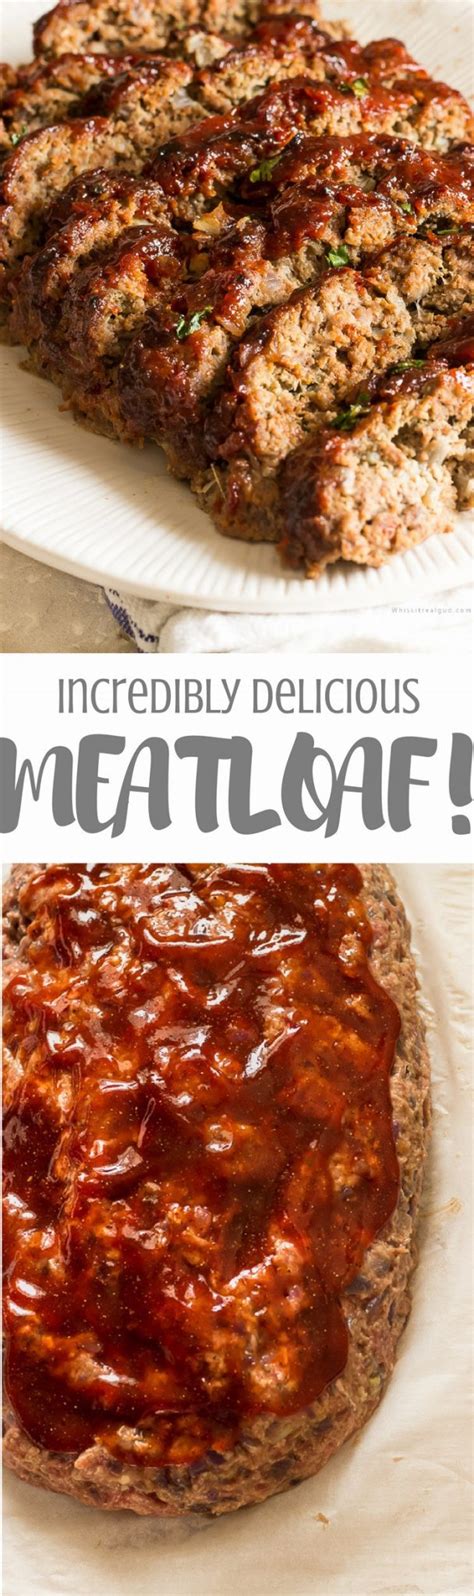 Classic meatloaf recipe…just like mom used to make. 2 Lb Meatloaf Recipe / Meatloaf with Stuffing is a tasty 2 ...